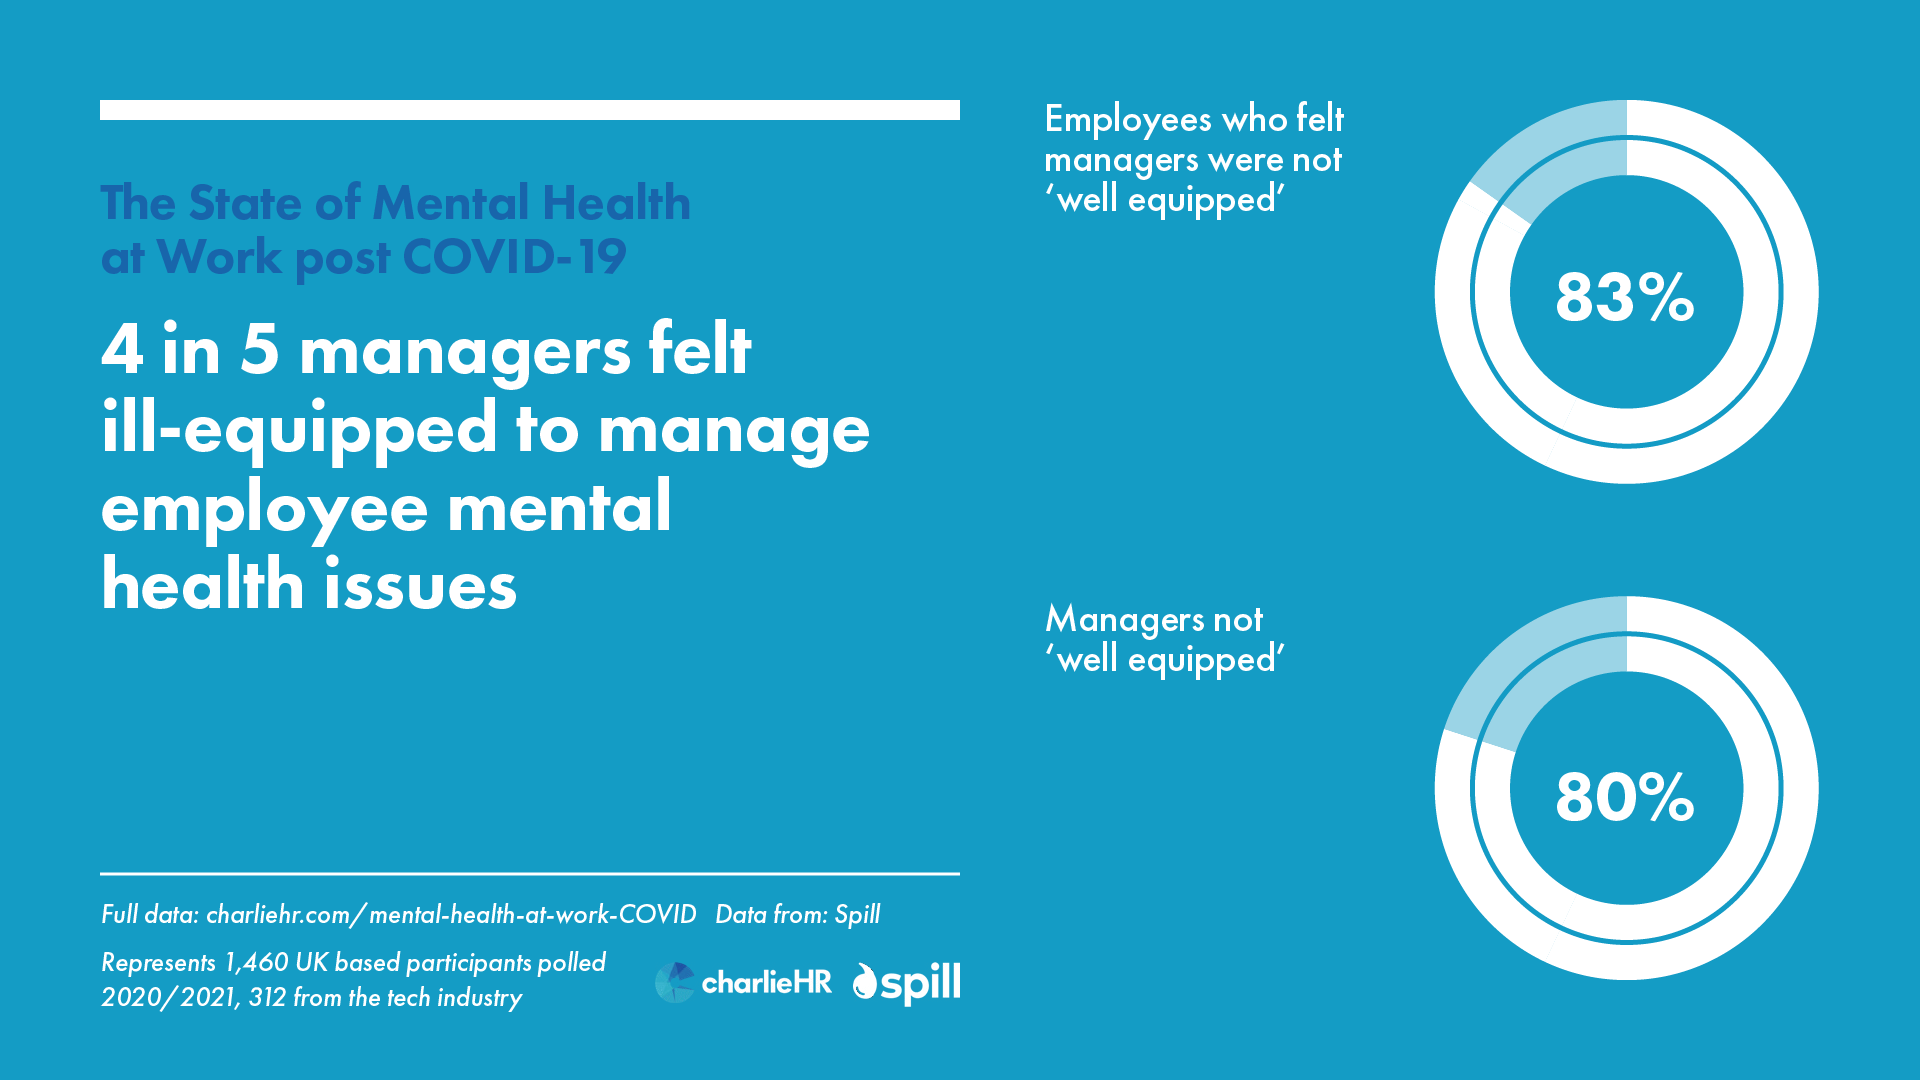 4 in 5 managers felt ill-equipped to manage employee mental health issues 